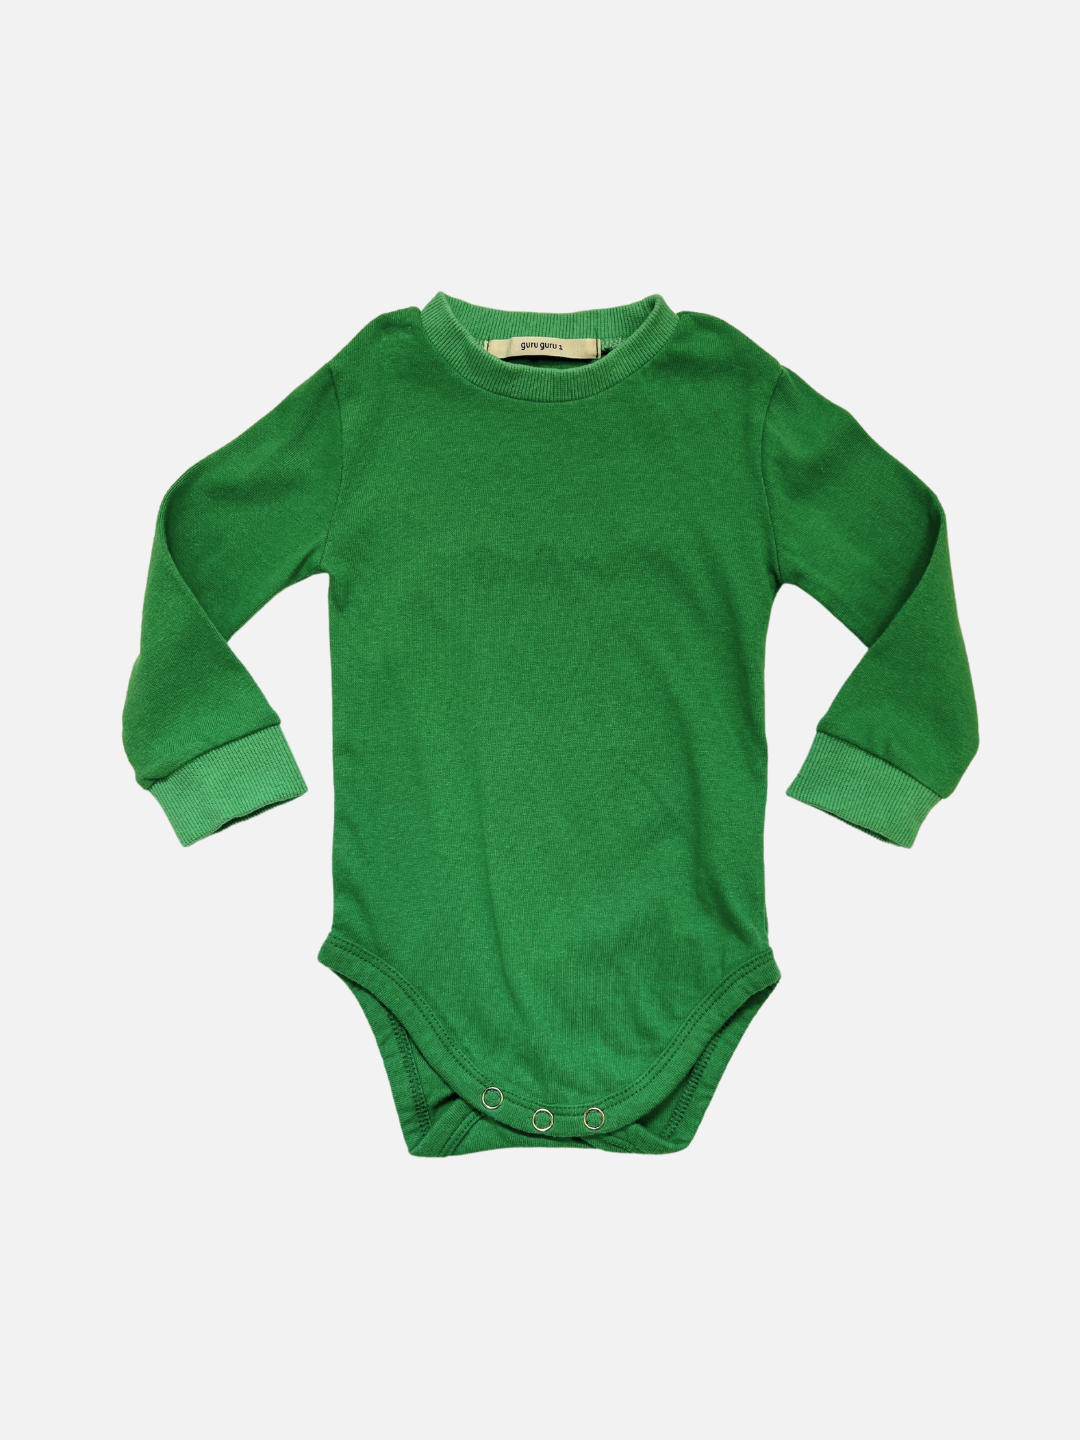 A front view of the patch onesie in Green